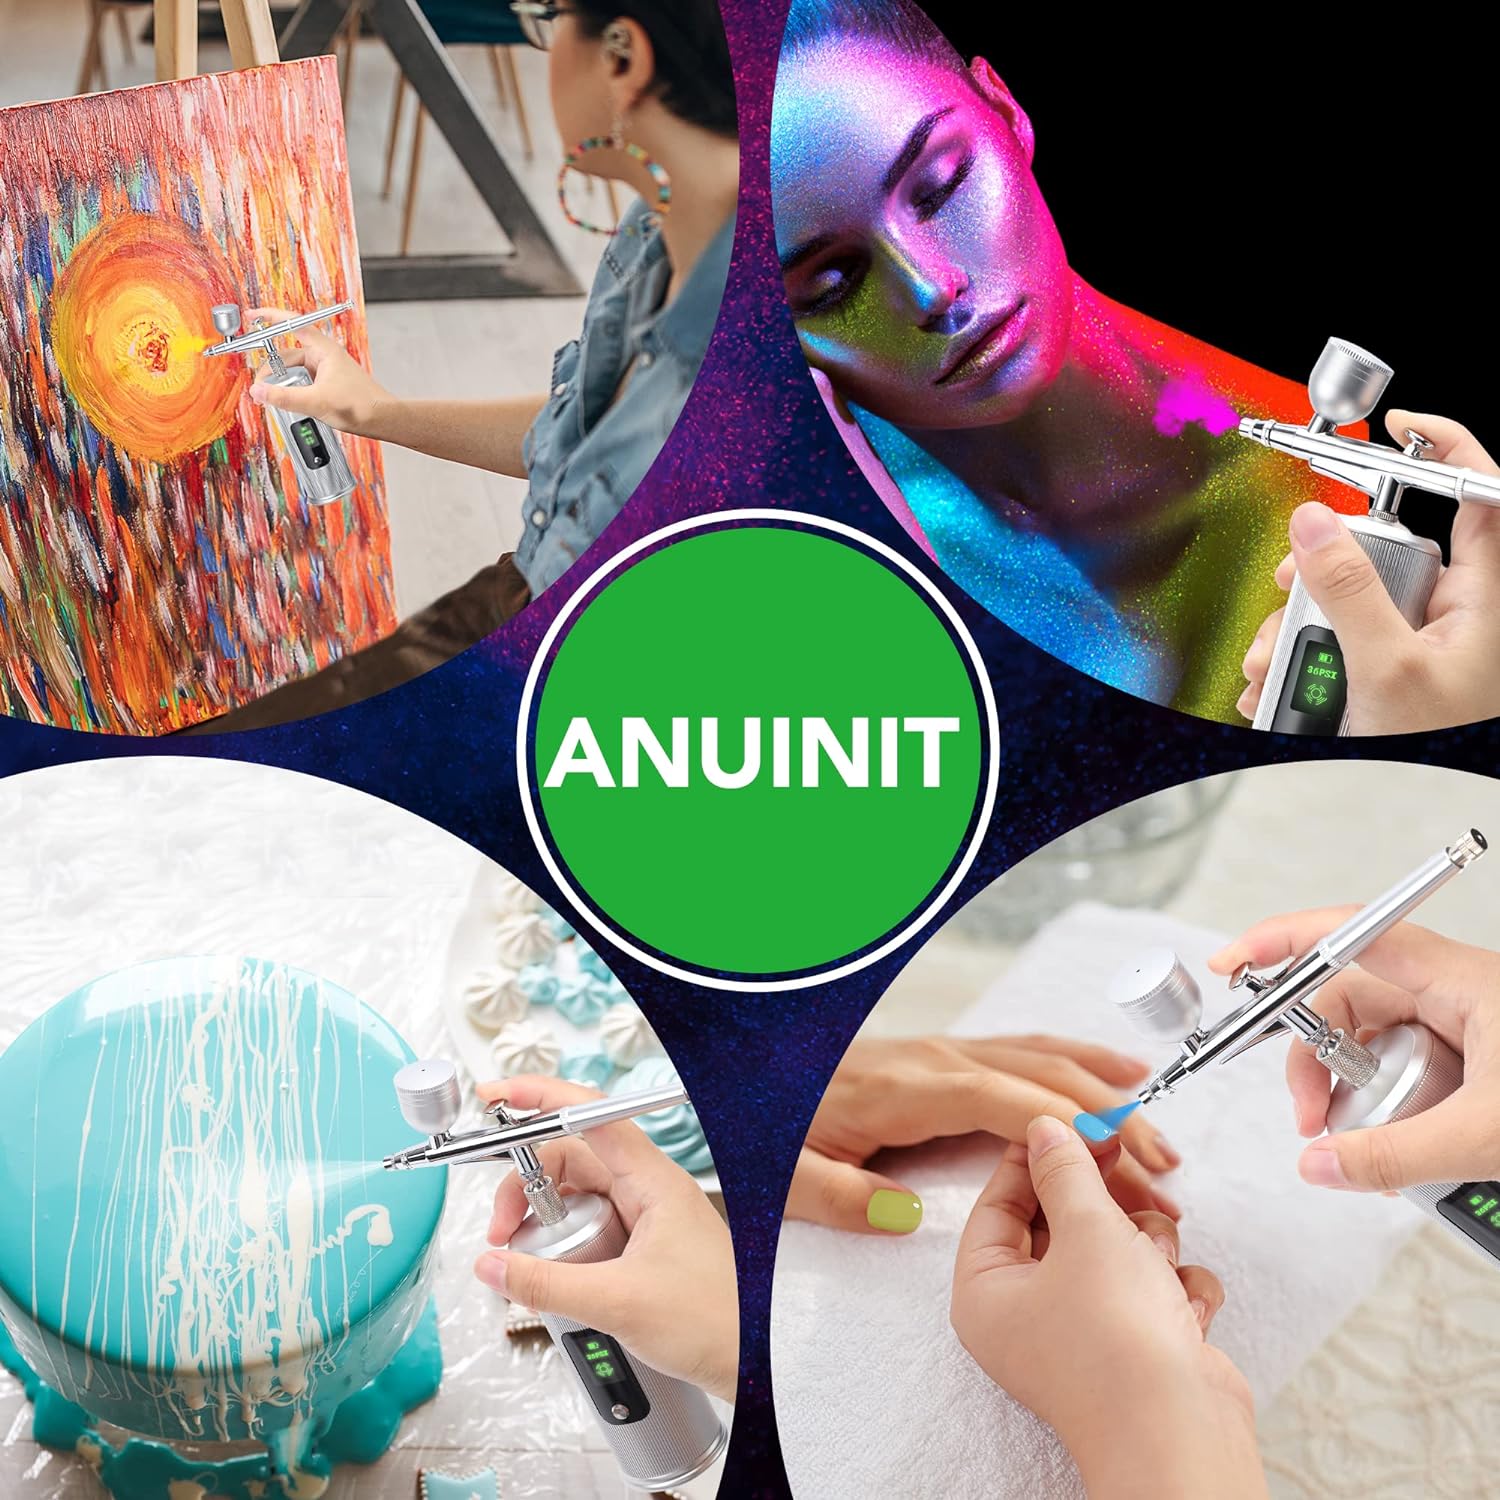 ANUINIT 36PSI Airbrush Kit with Compressor Dual-Action Mode LCD Screen Cordless Handheld Airbrush for Nails, Cake, Makeup, Painting, Artwork Coloring, Upgraded Rechargeable Anti-Slip Airbrush